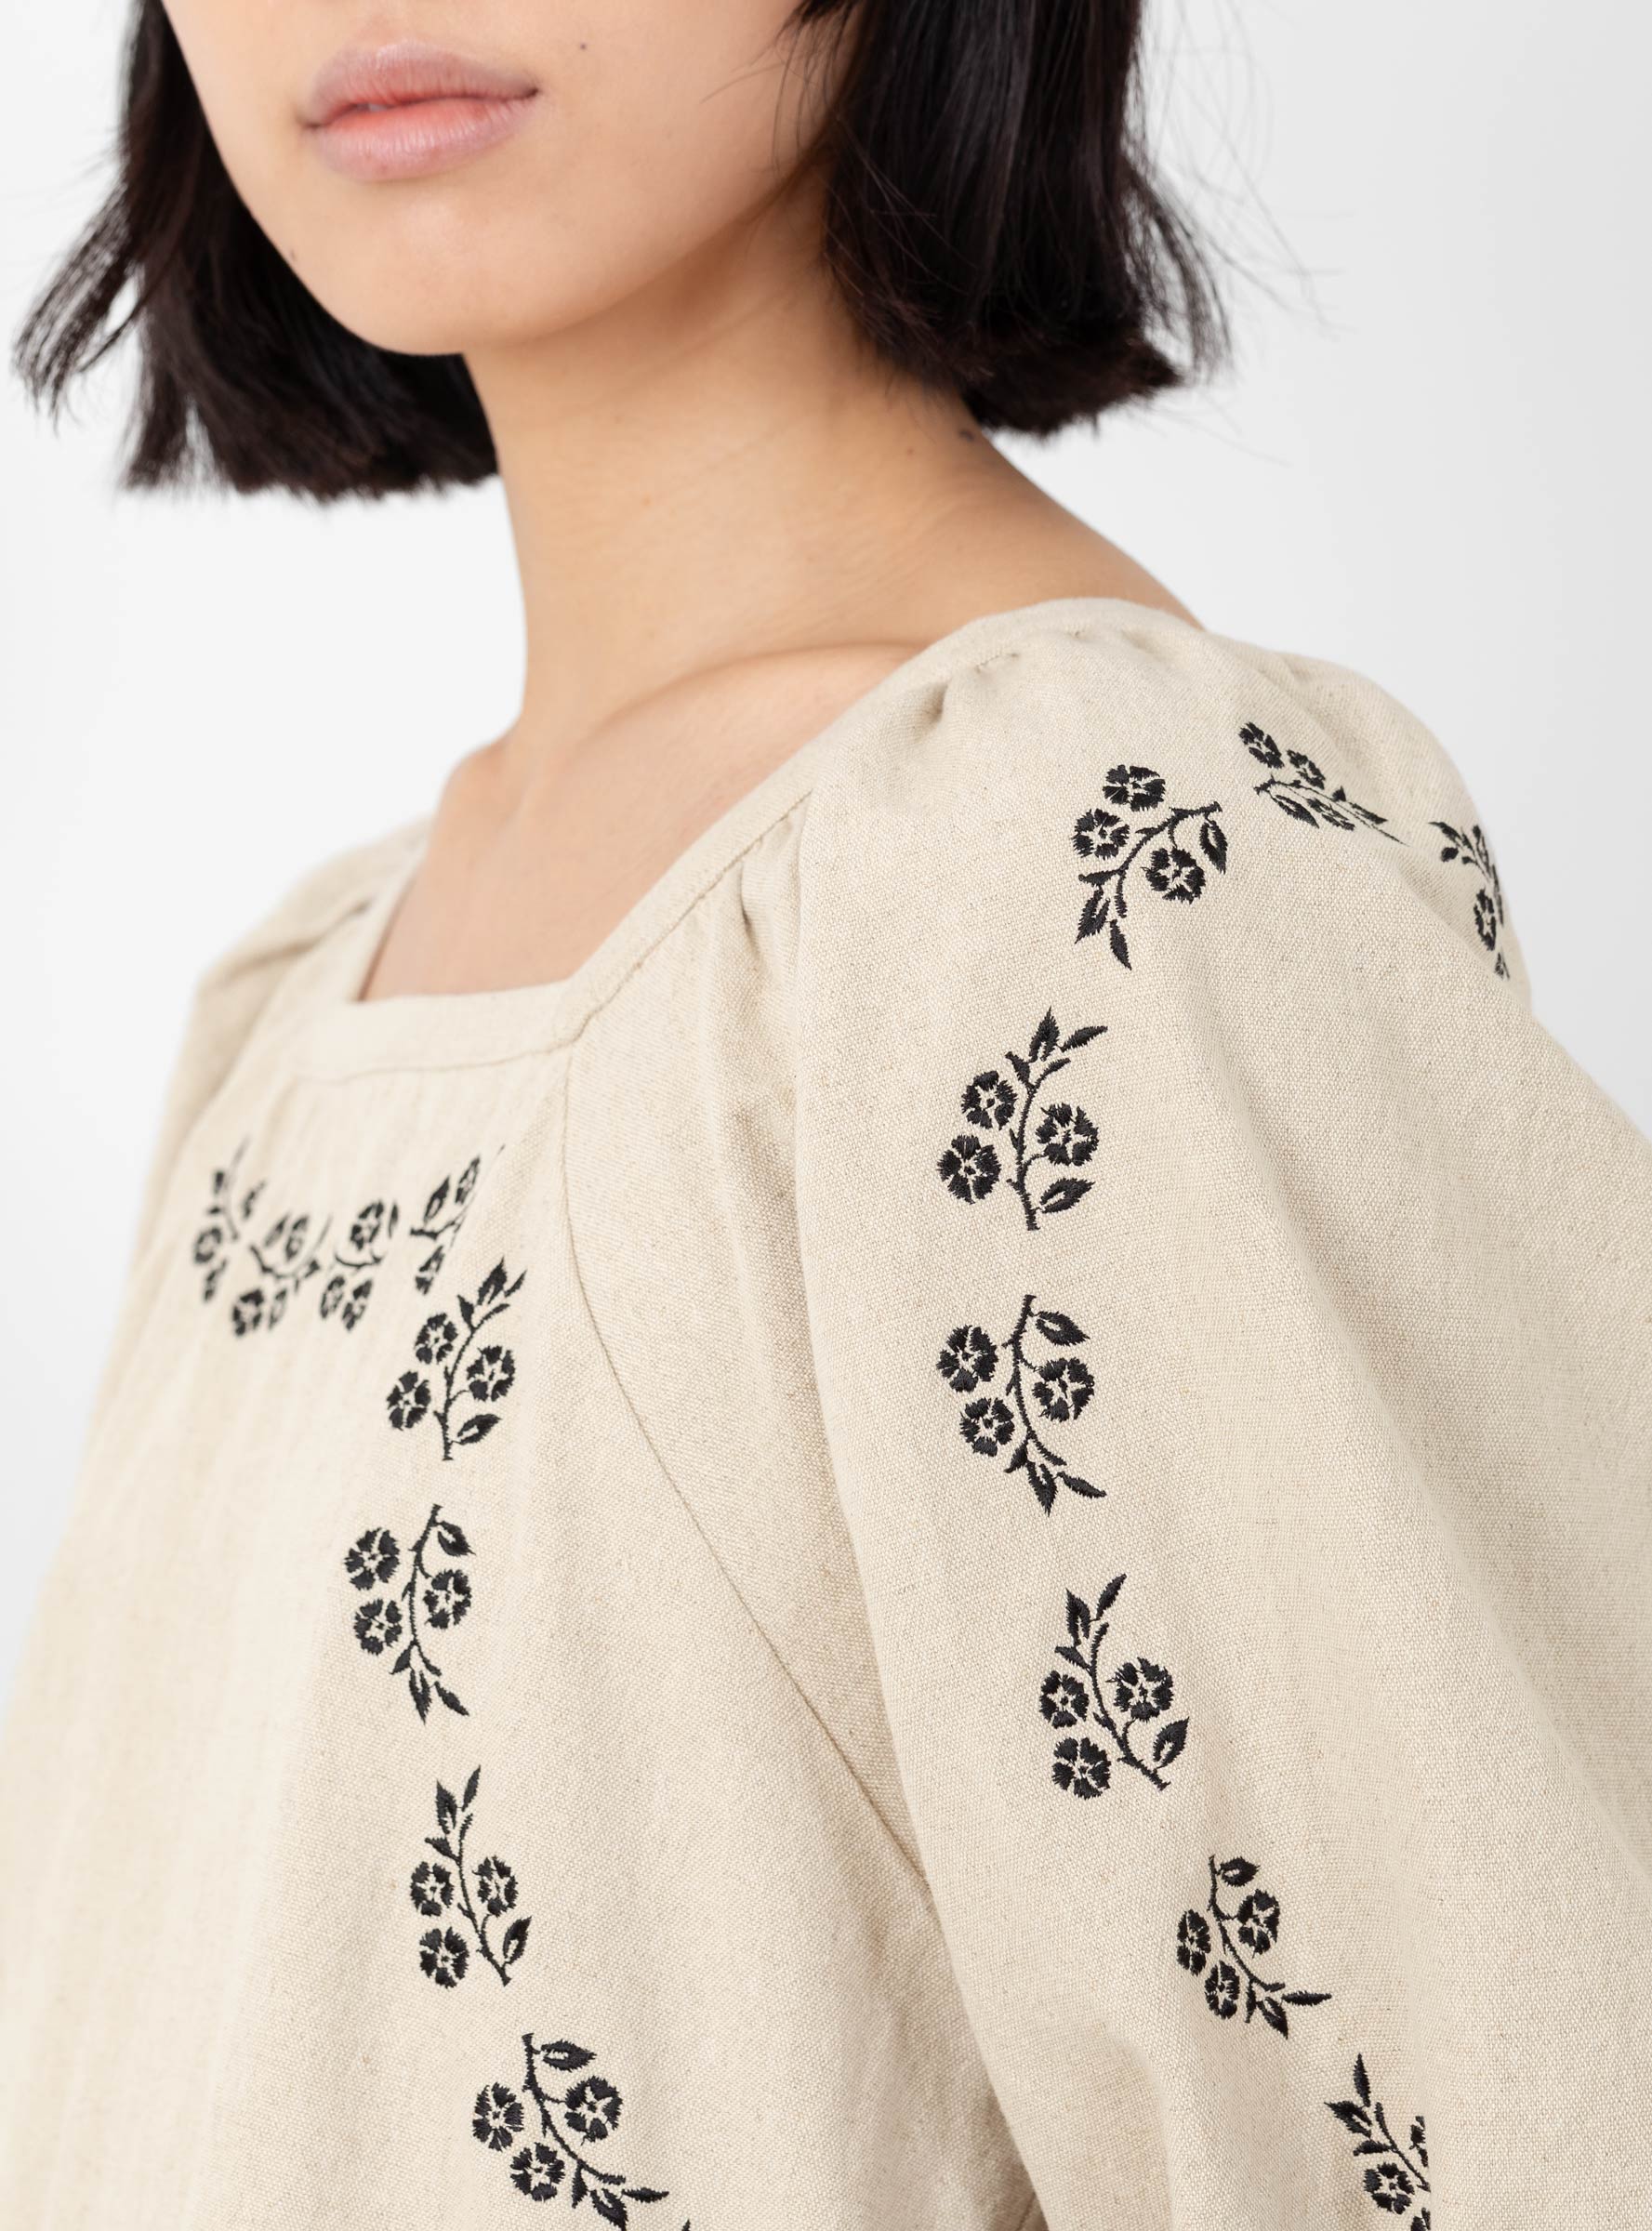  Sideline Heather Dress Oat Embroidered - Size: XS